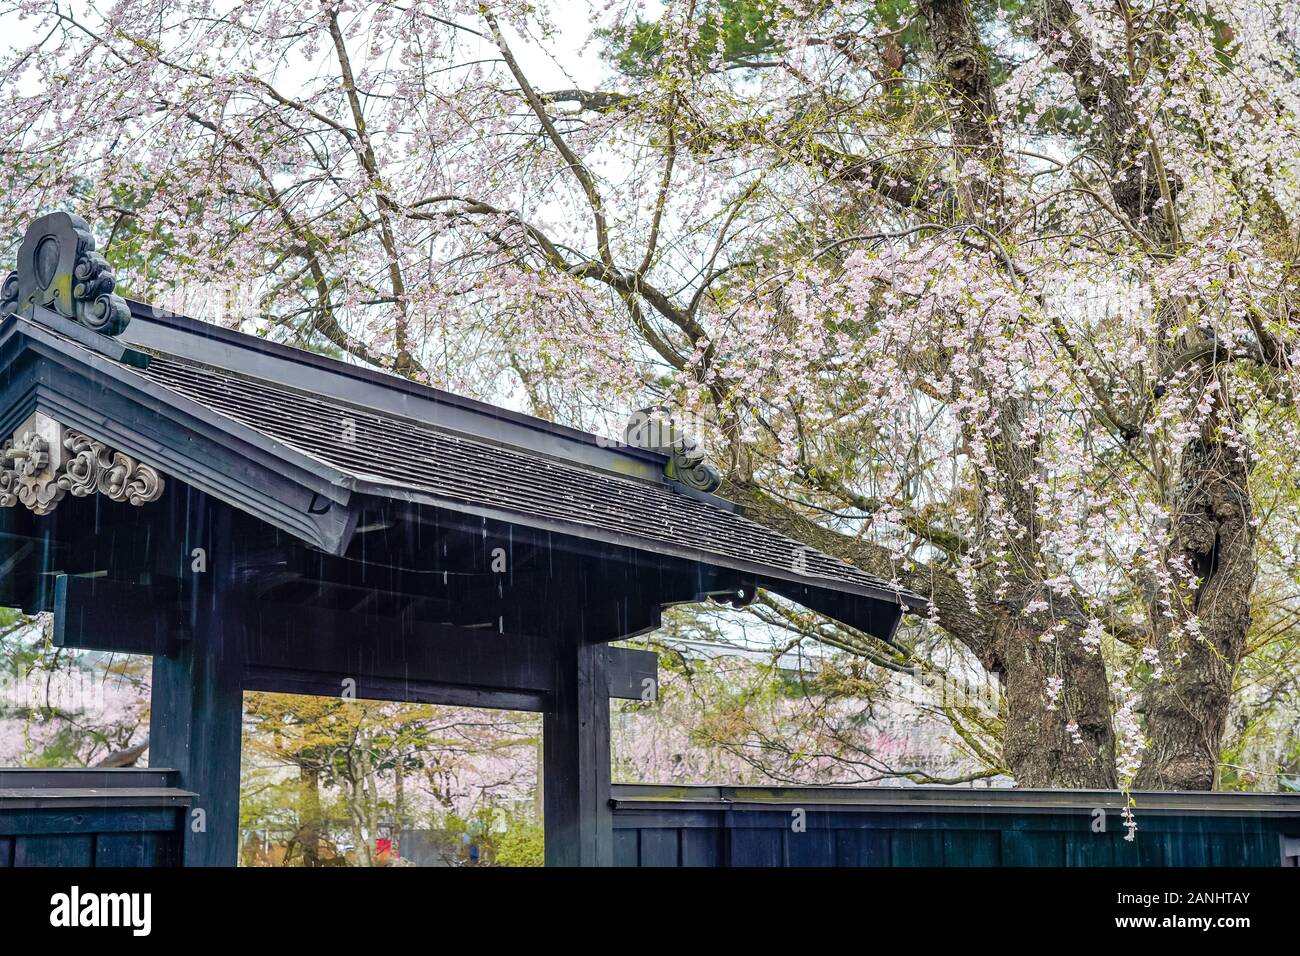 close up cherry blossom flowers with traditional Japanese architecture roof In the background Stock Photo